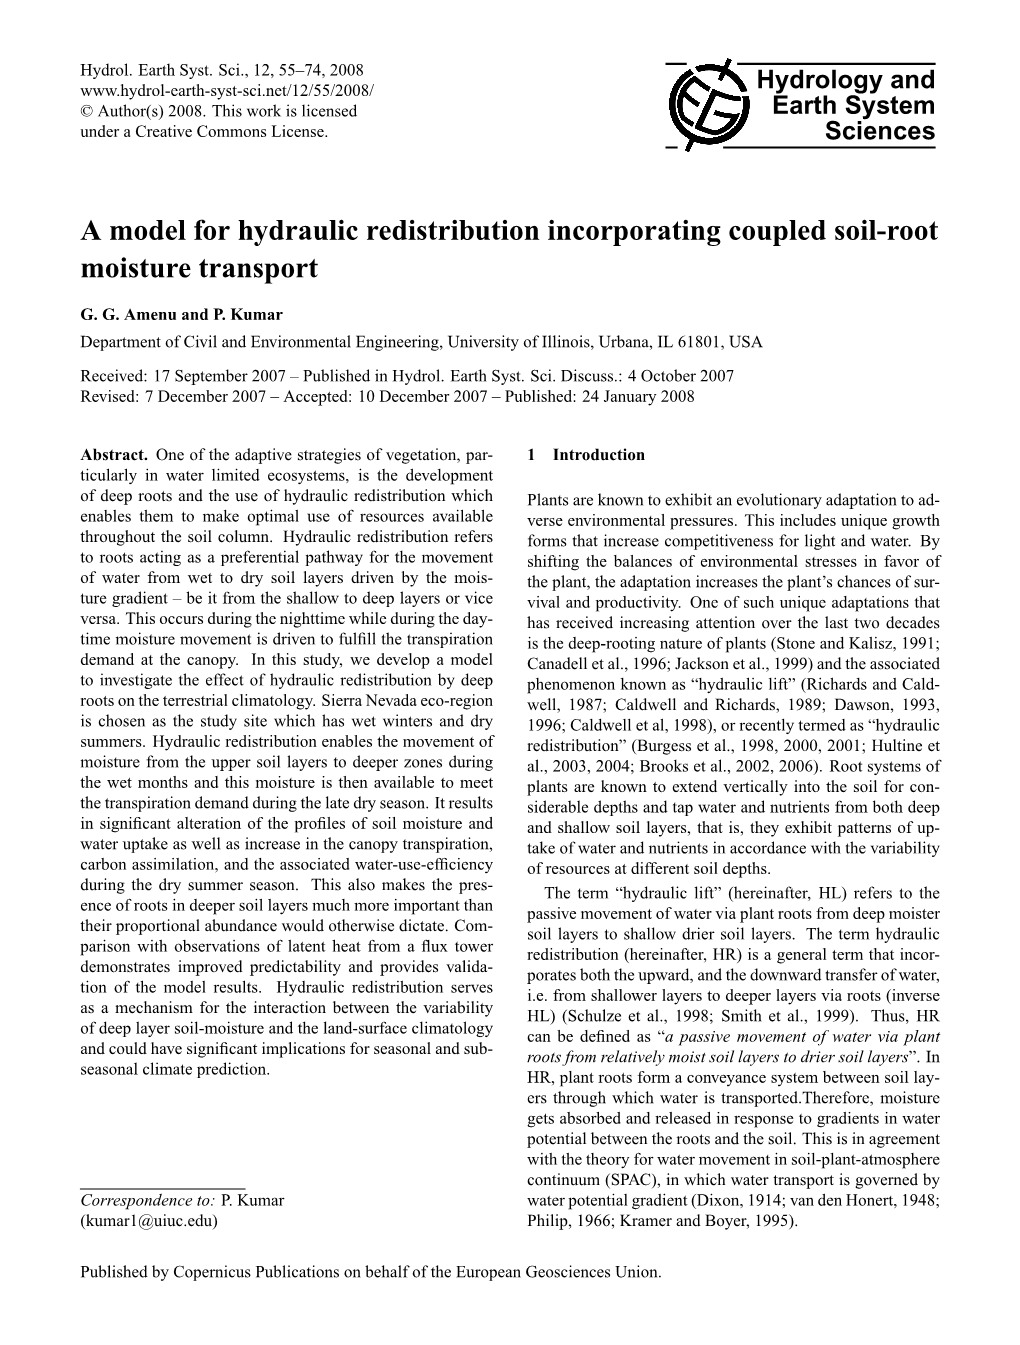 A Model for Hydraulic Redistribution Incorporating Coupled Soil-Root Moisture Transport